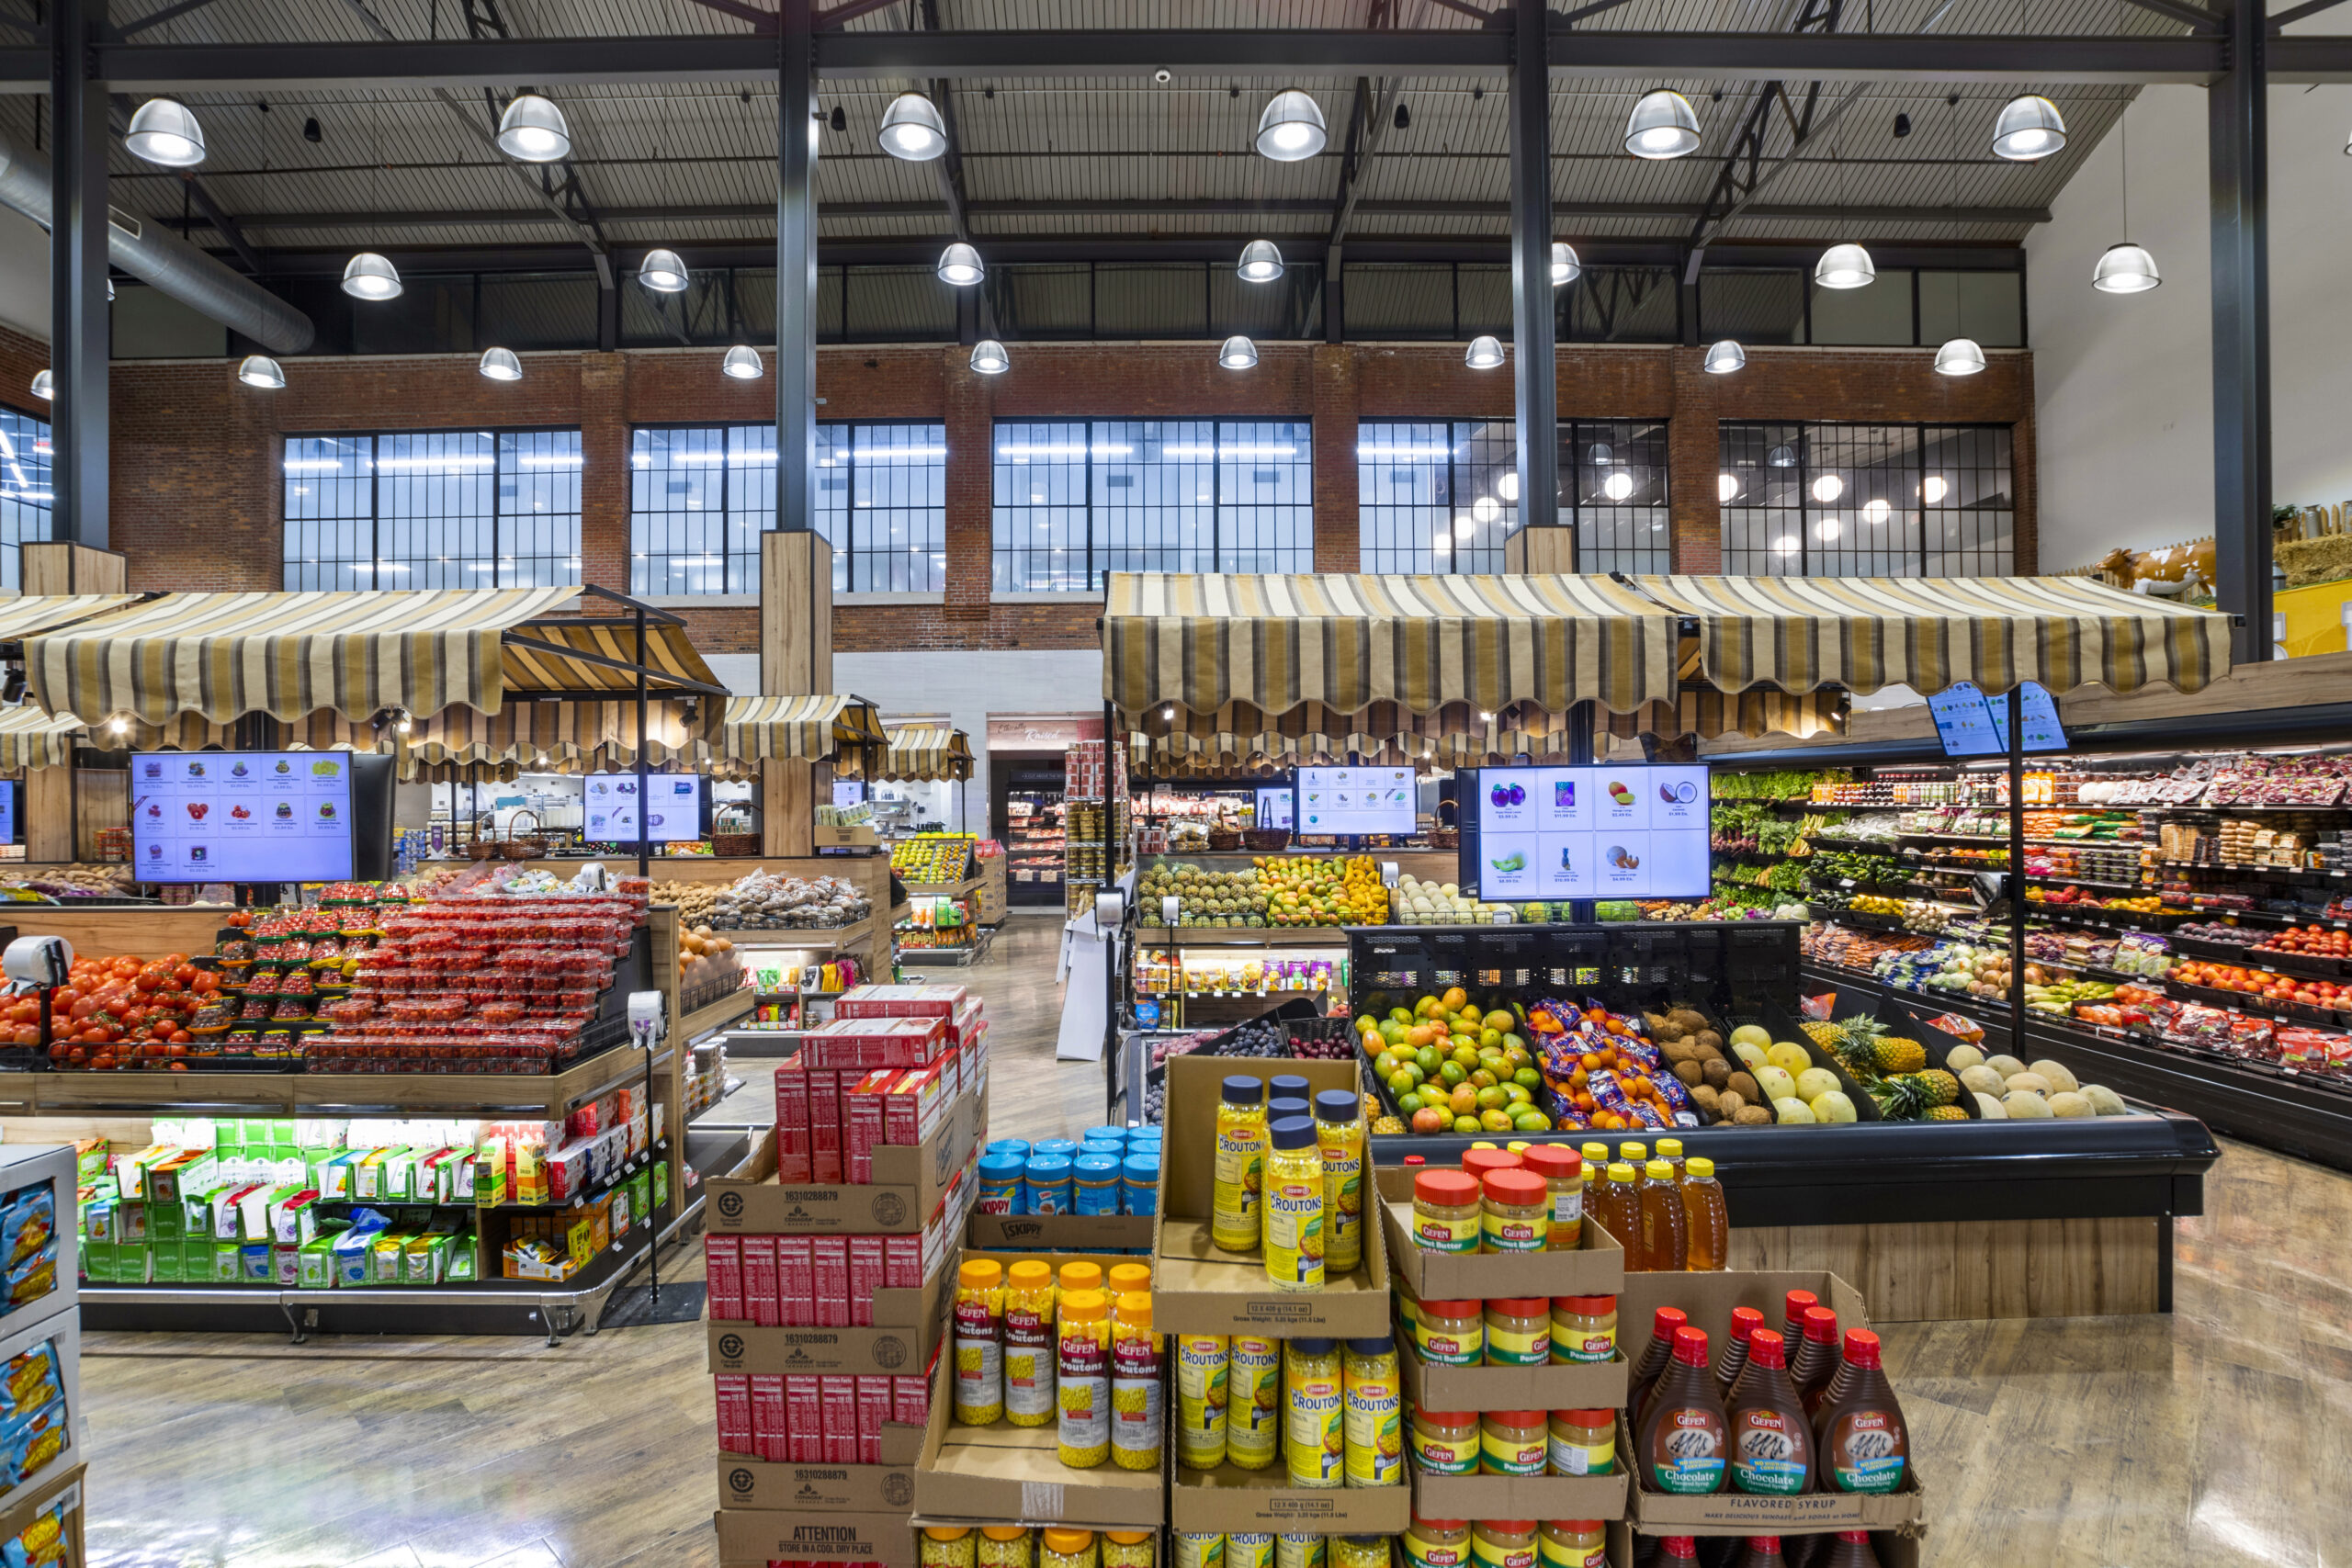 Filamento lights used for high ceiling grocery store Aisle One located in Passaic, New Jersey, increasing LED output, reducing glare, and increasing efficiency.